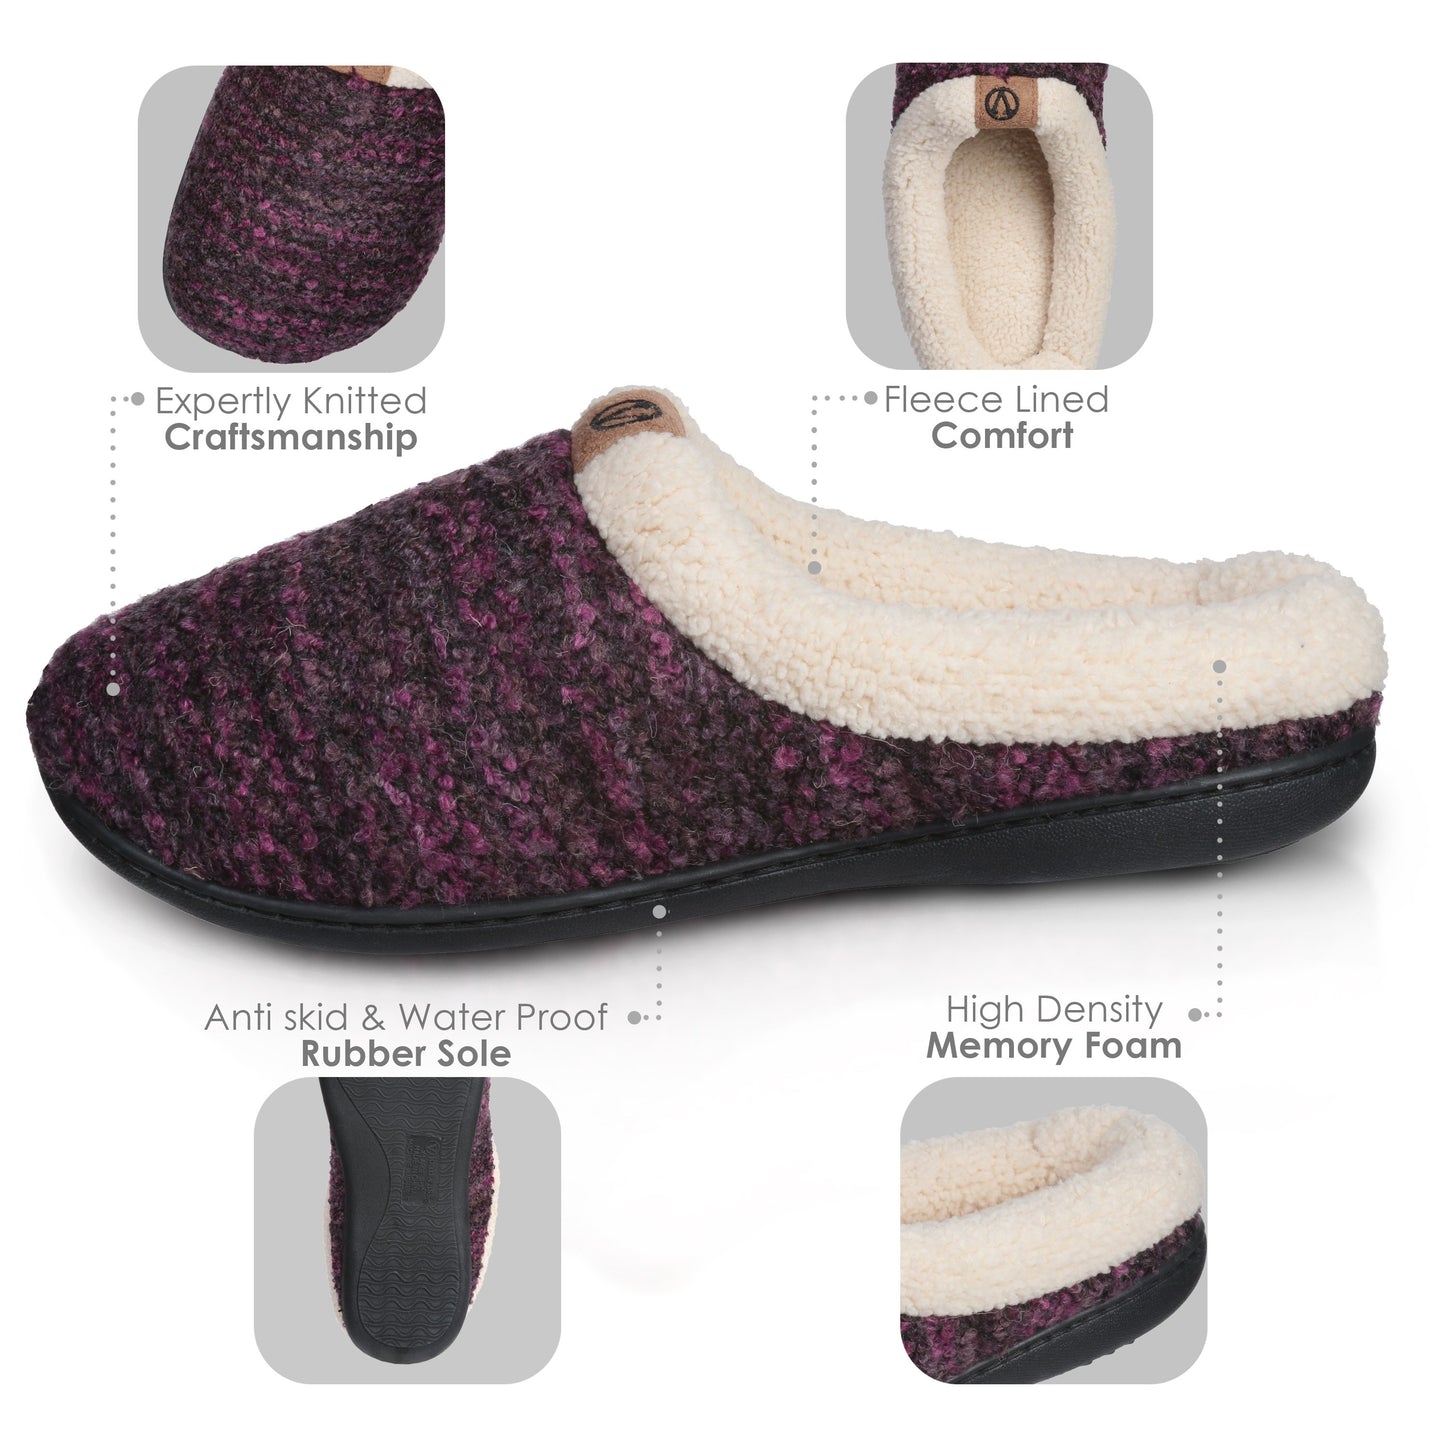 Roxoni Womens Knitted Fleece Lined Clog Slippers Warm House Shoe